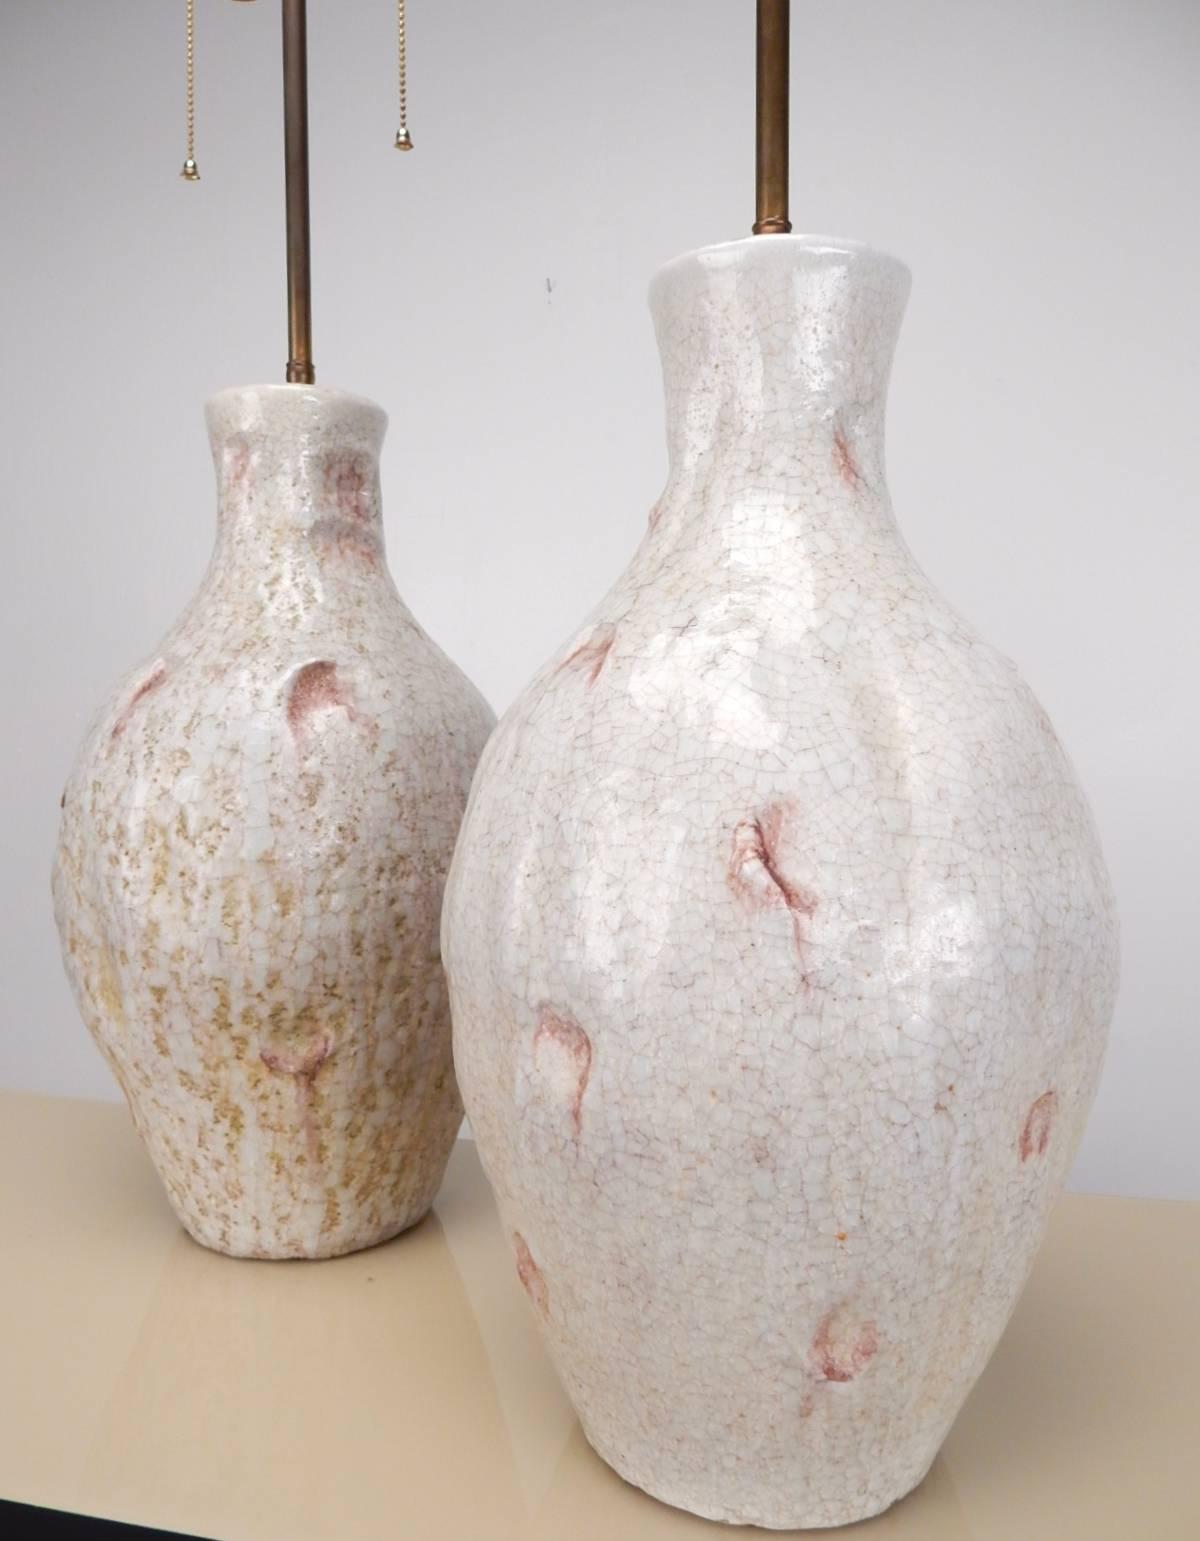 Signed pair of Marcello Fantoni art pottery table lamps with amazing glaze.
White with abstract thumb dimples dripping with light violet glaze.
Glaze crazing over entire body. Really stunning midcentury design pieces.
Each is signed by Fantoni